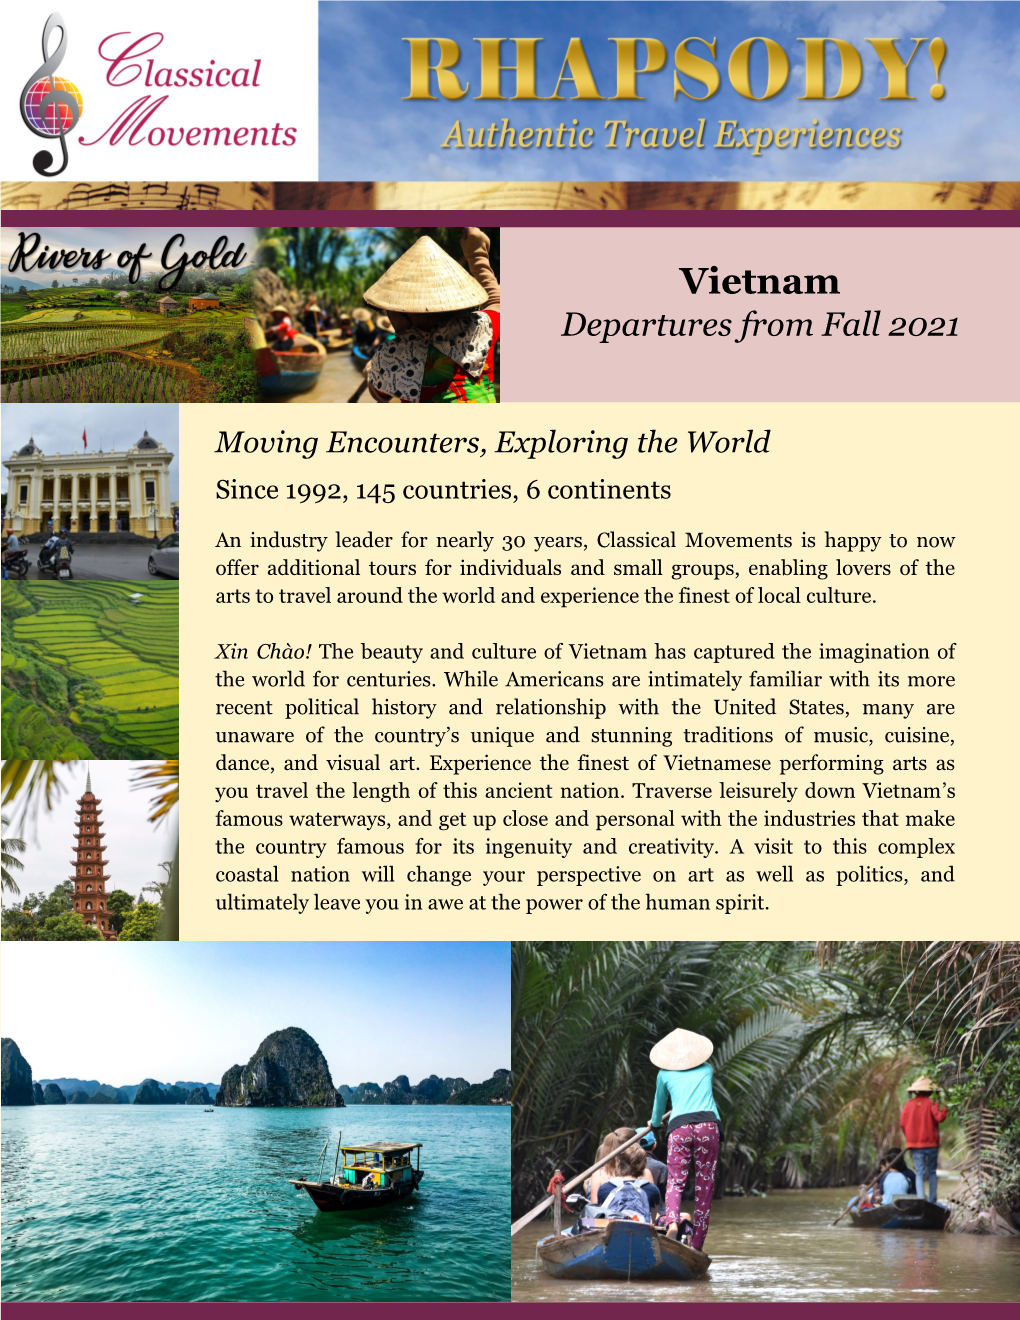 Vietnam Departures from Fall 2021